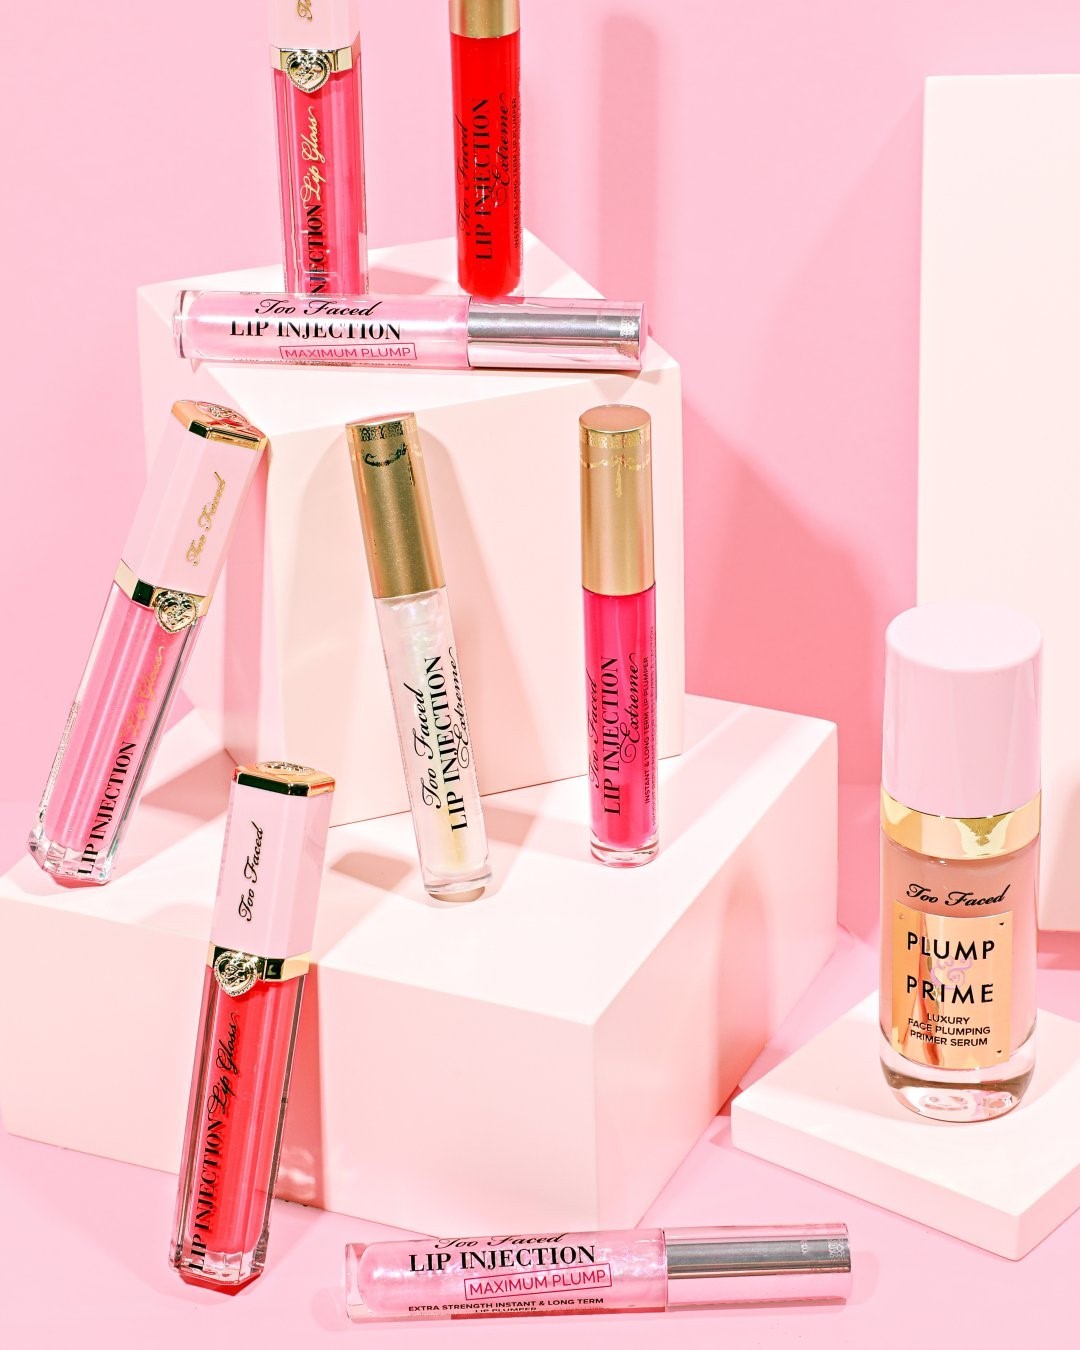 Too Faced Cosmetics - So many ways to PLUMP it up! 💖 Volumize your lips & face the easy way with our most scientifically advanced plumpers ever. Leave a 😍 below if you spot your fave! #toofaced